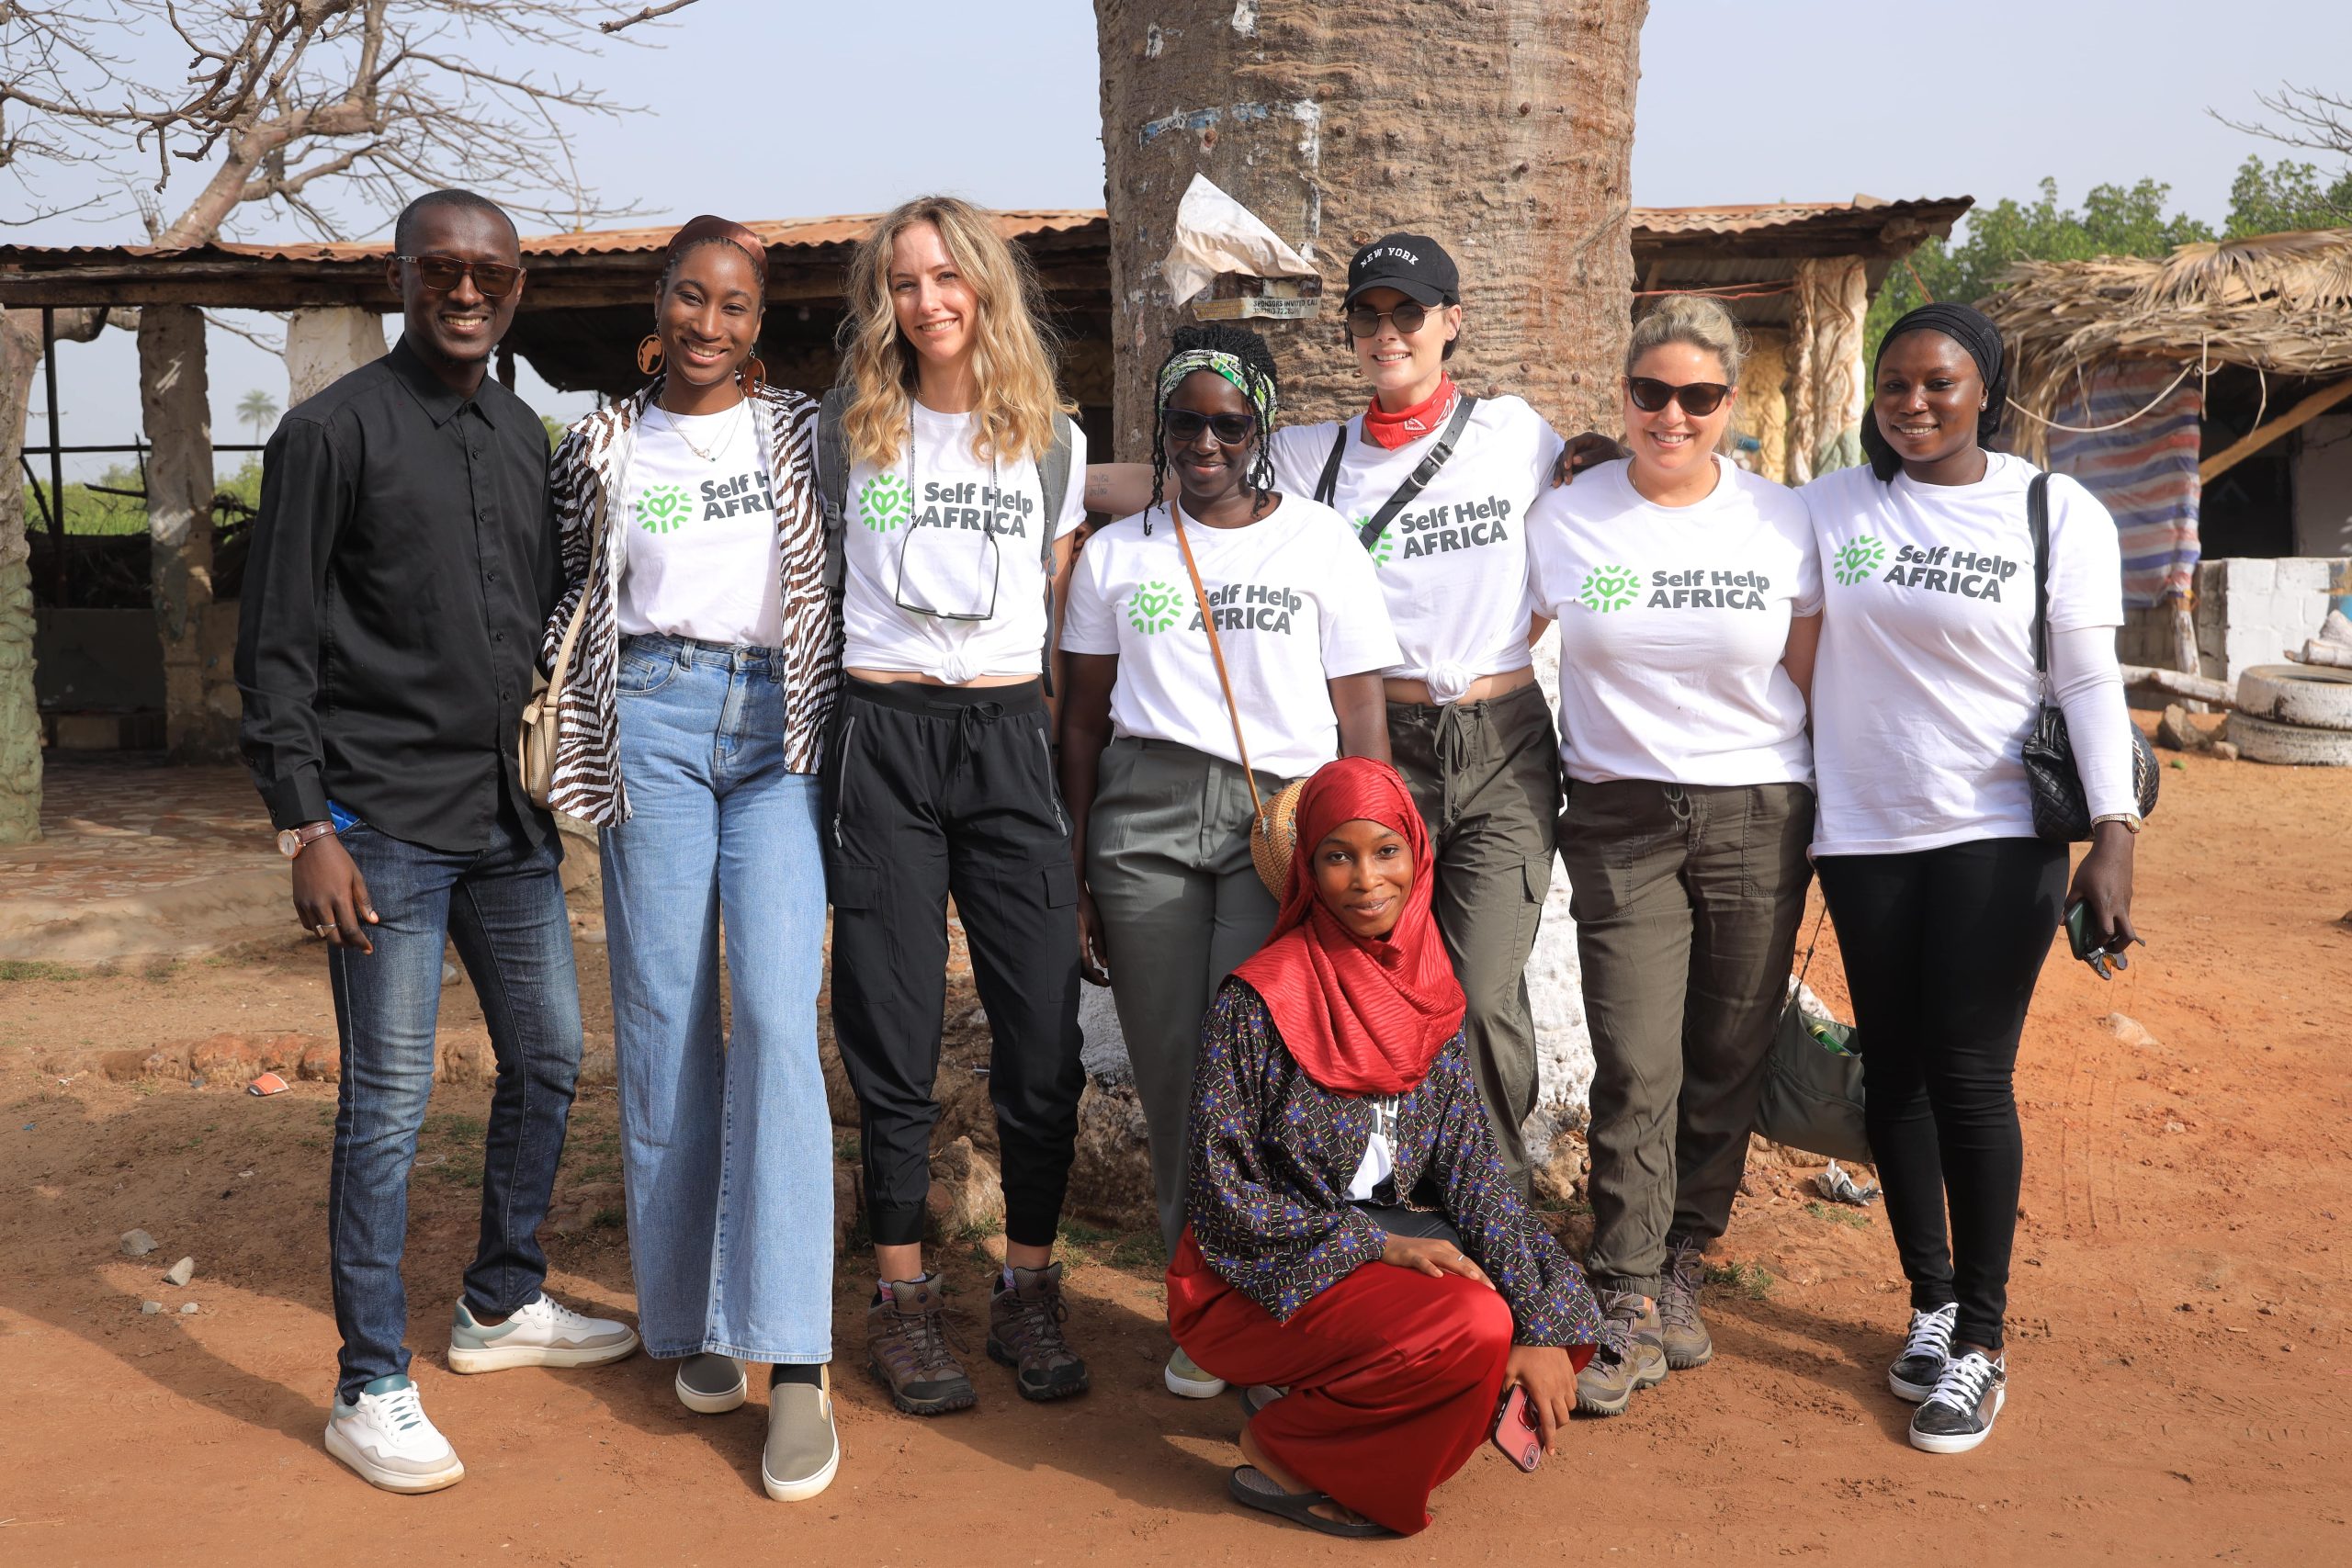 Jaimie Alexander and members of the Self Help Africa team in The Gambia.